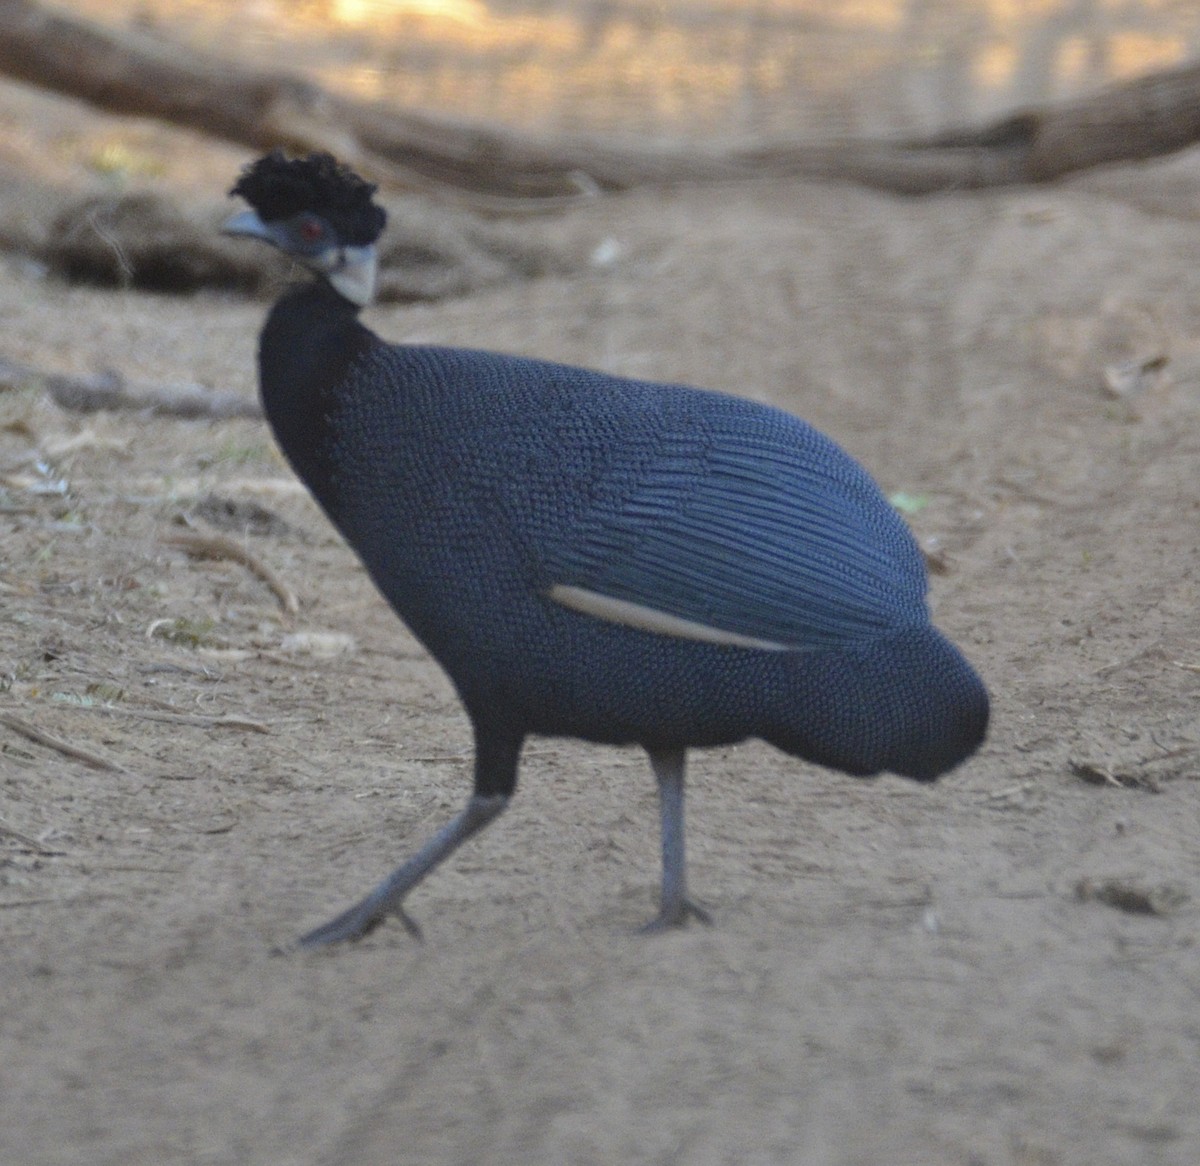 Southern Crested Guineafowl - Andrew Mack